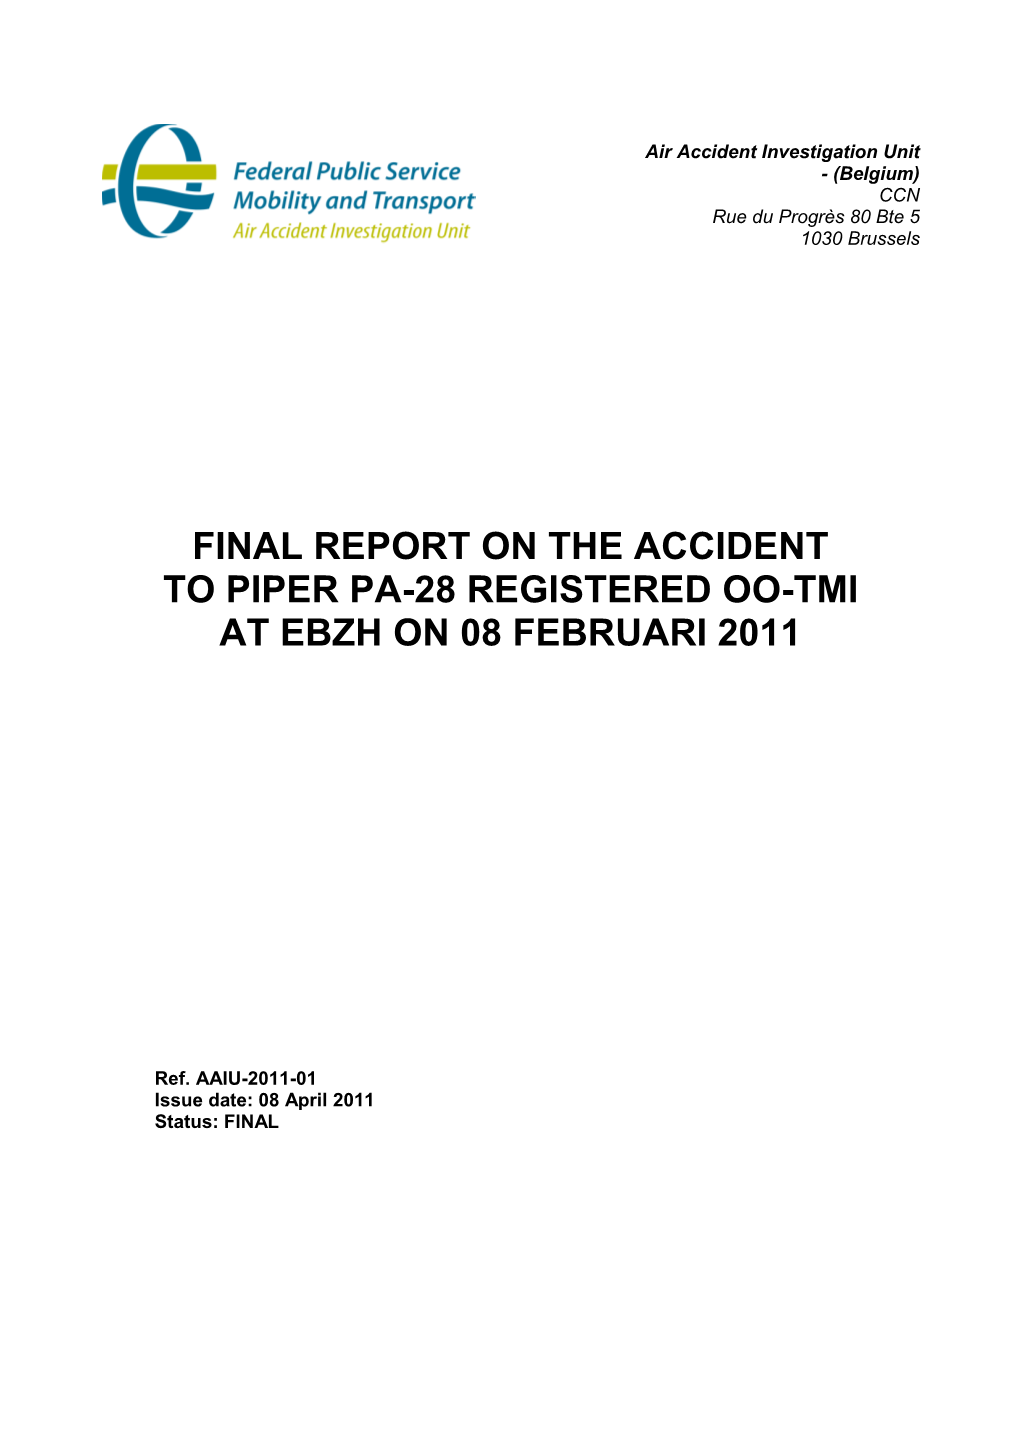 Final Report on the Accident to Piper Pa-28 Registered Oo-Tmi at Ebzh on 08 Februari 2011